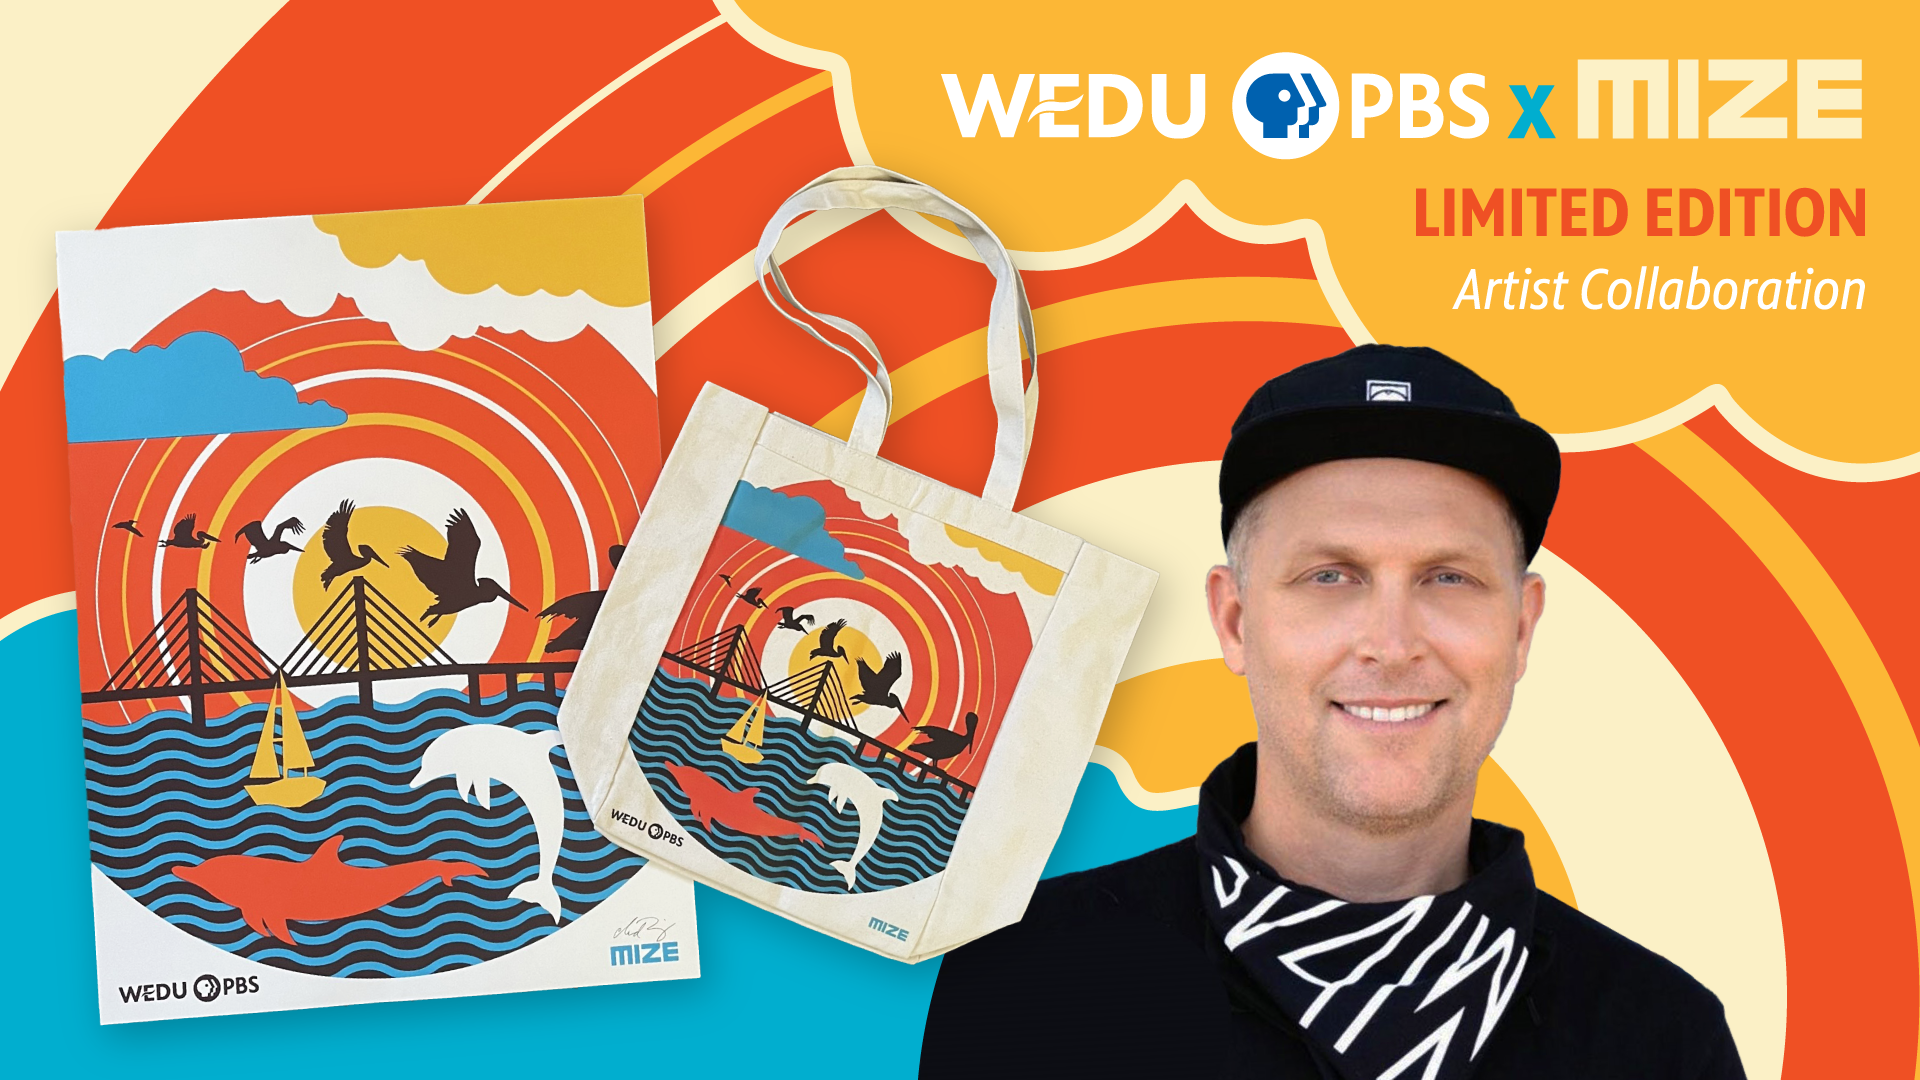 Chad Mize alongside limited edition print and tote bag